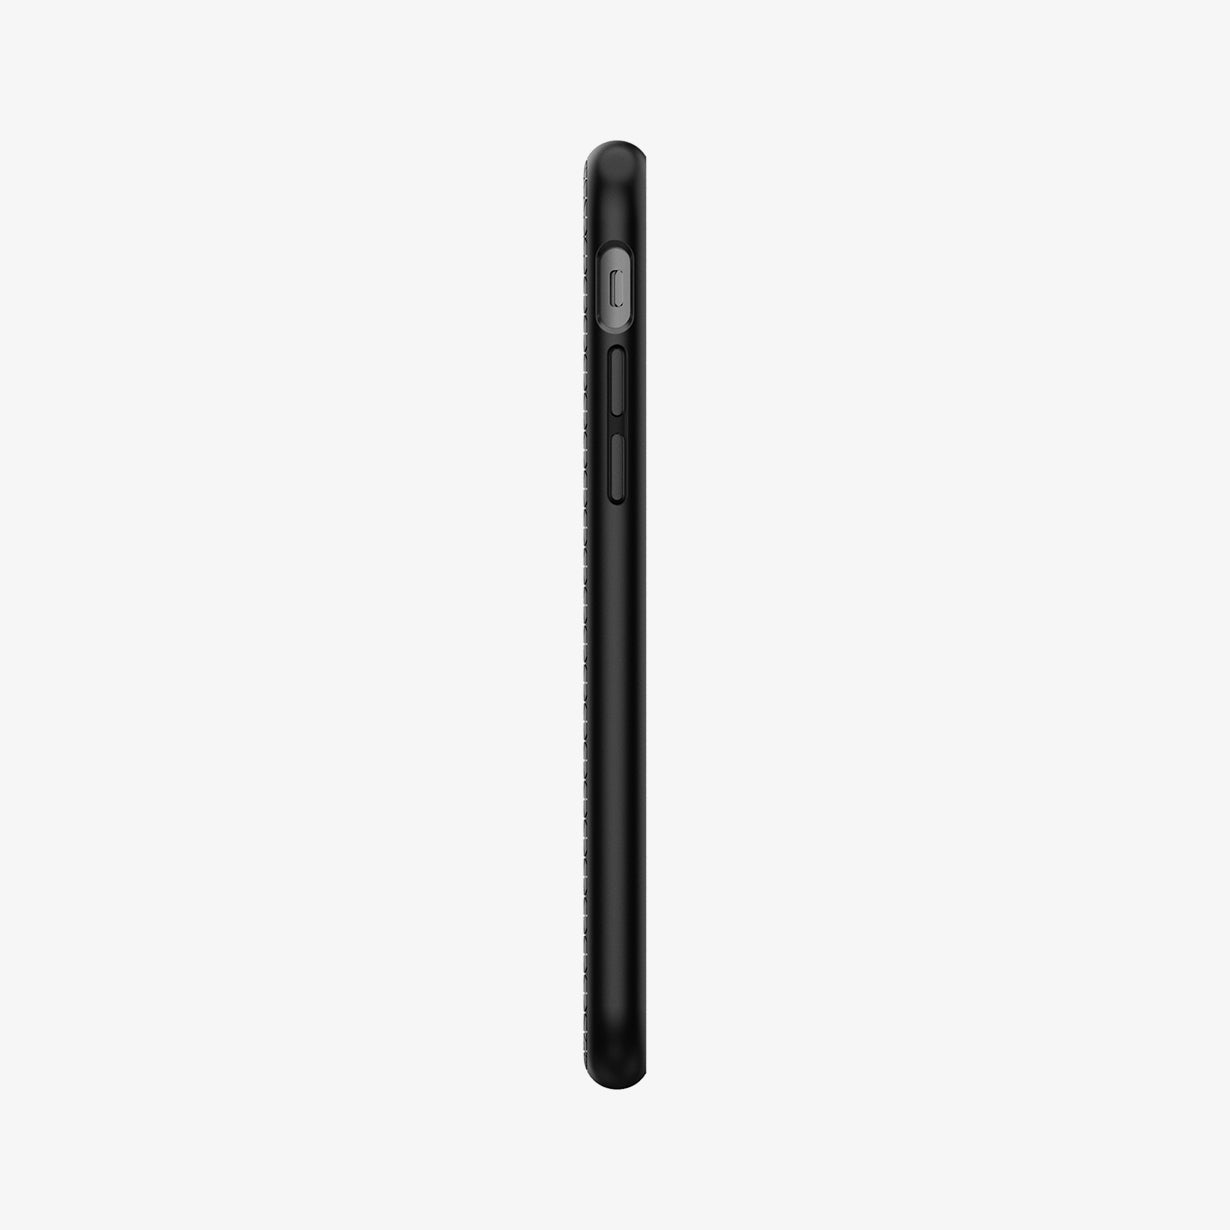 042CS20511 - iPhone SE Liquid Air case in black showing showing the side